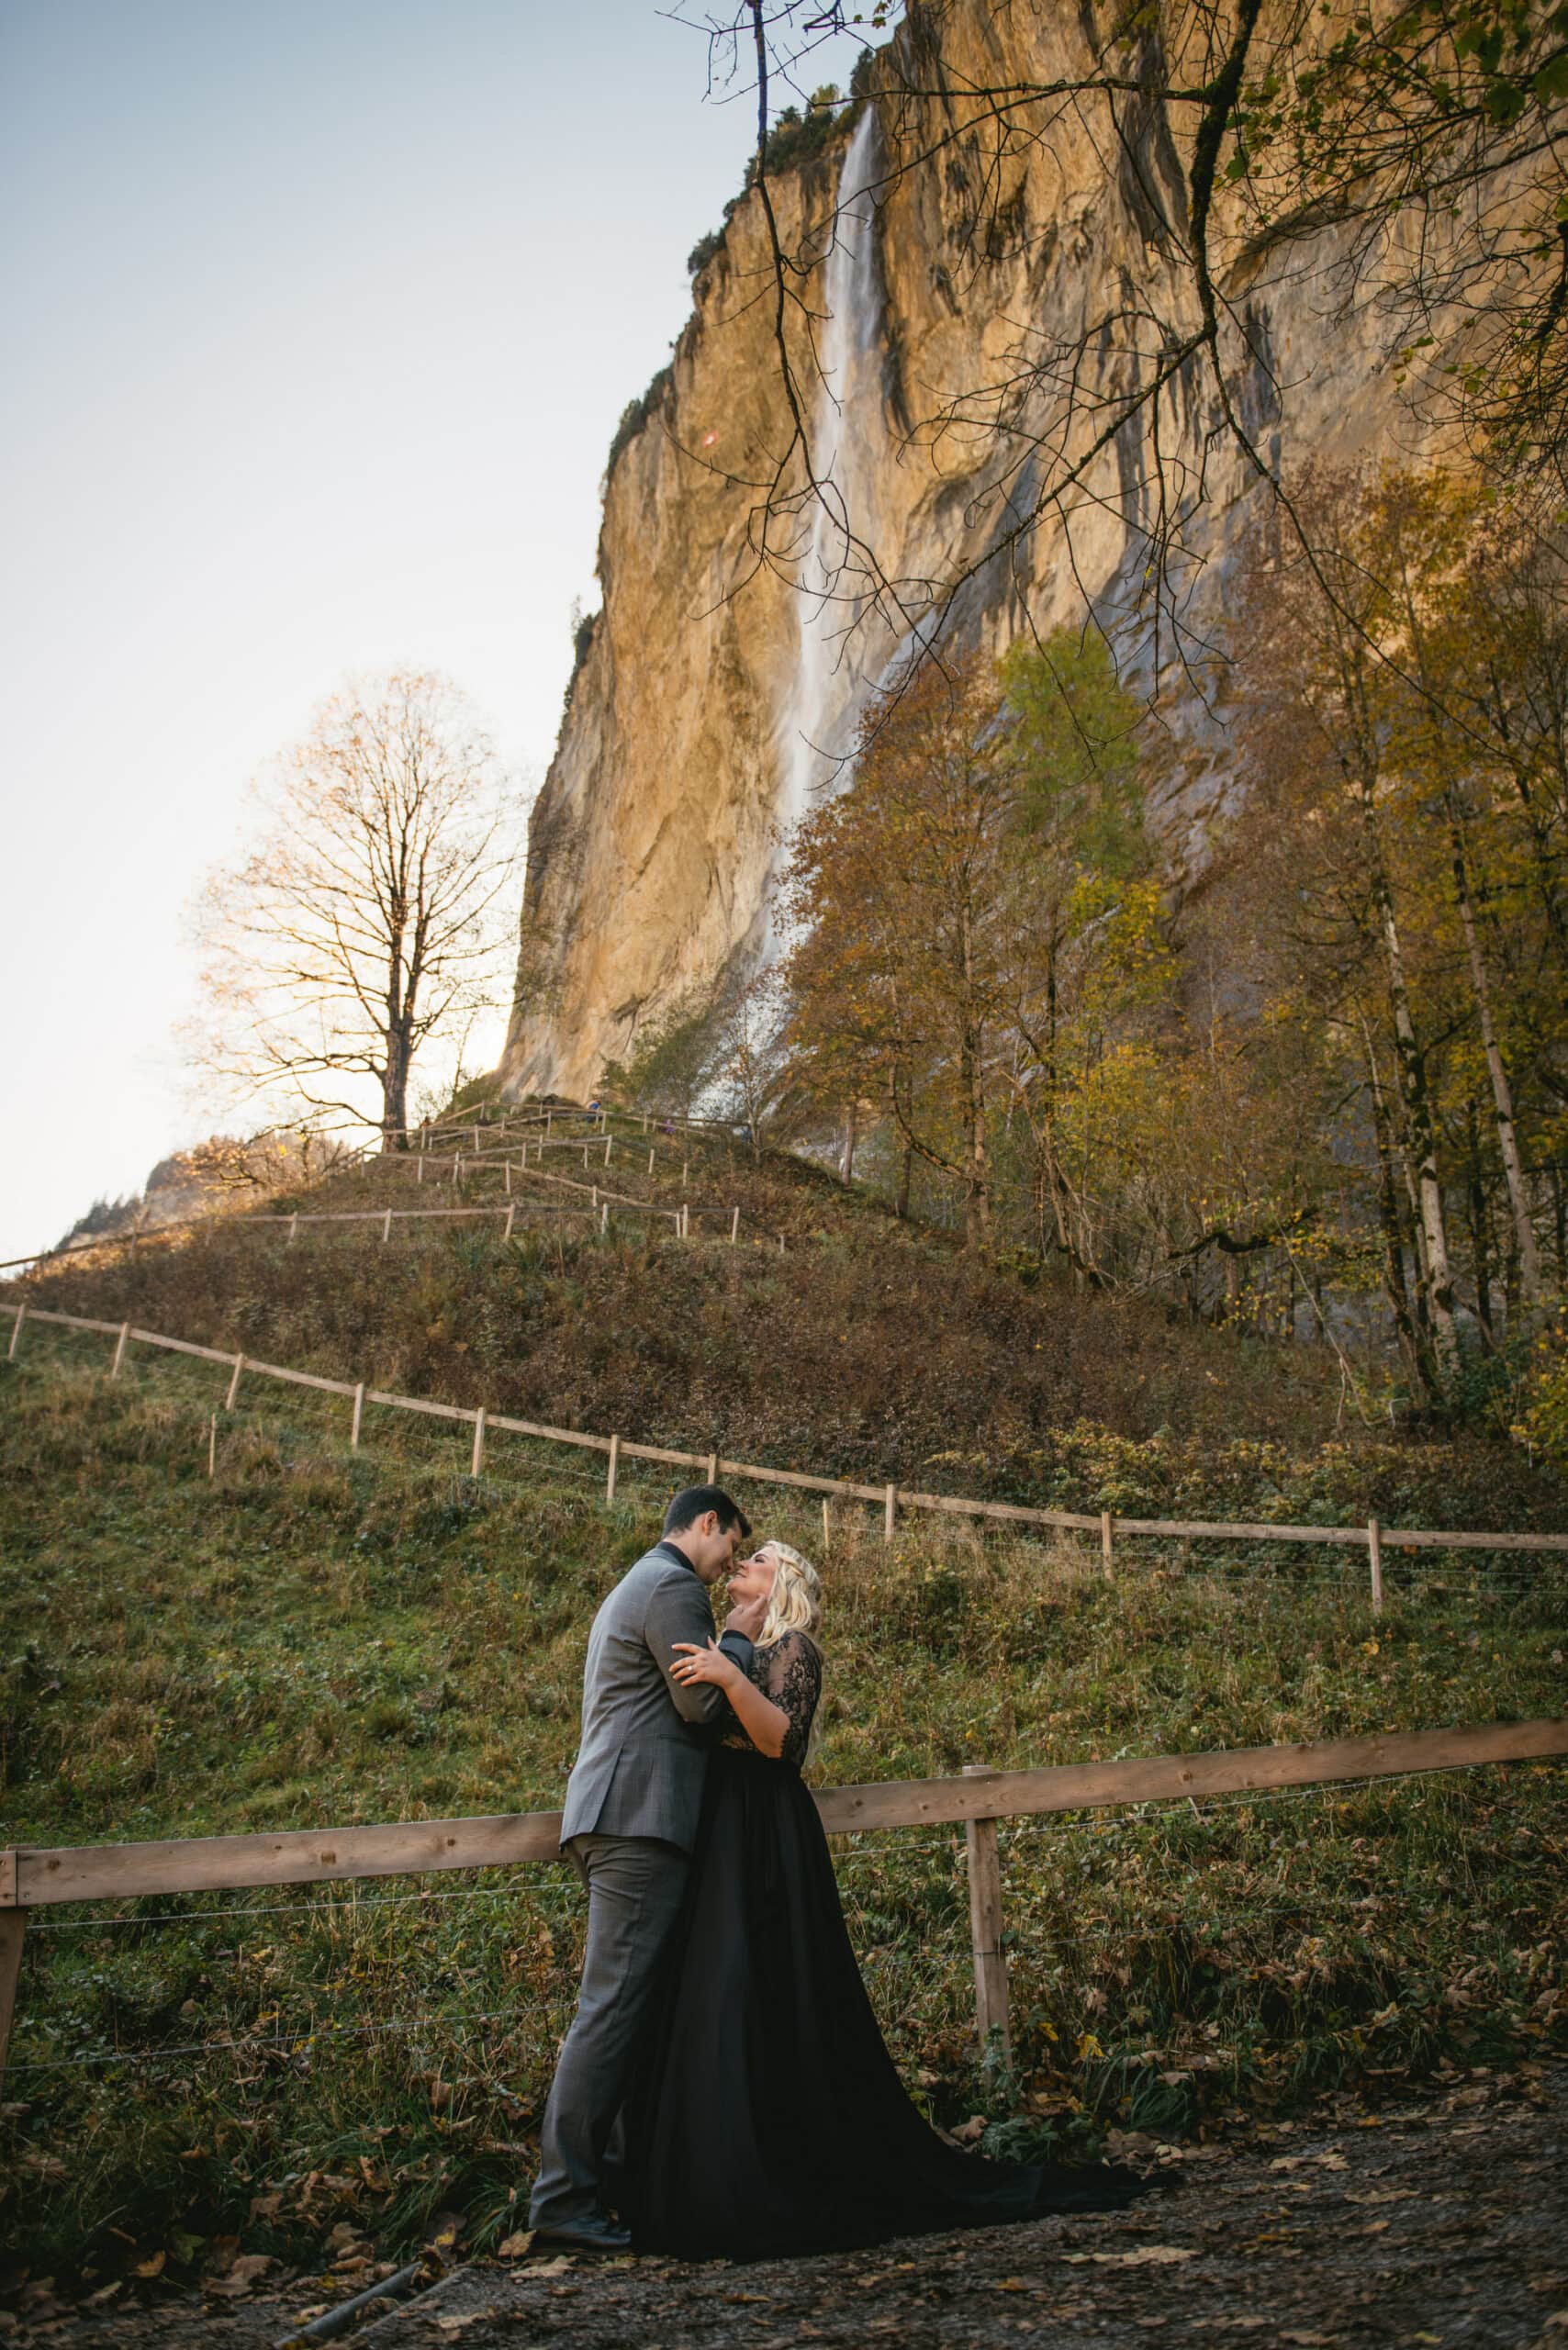 Couple posing with the Lauterbrunnen waterfall